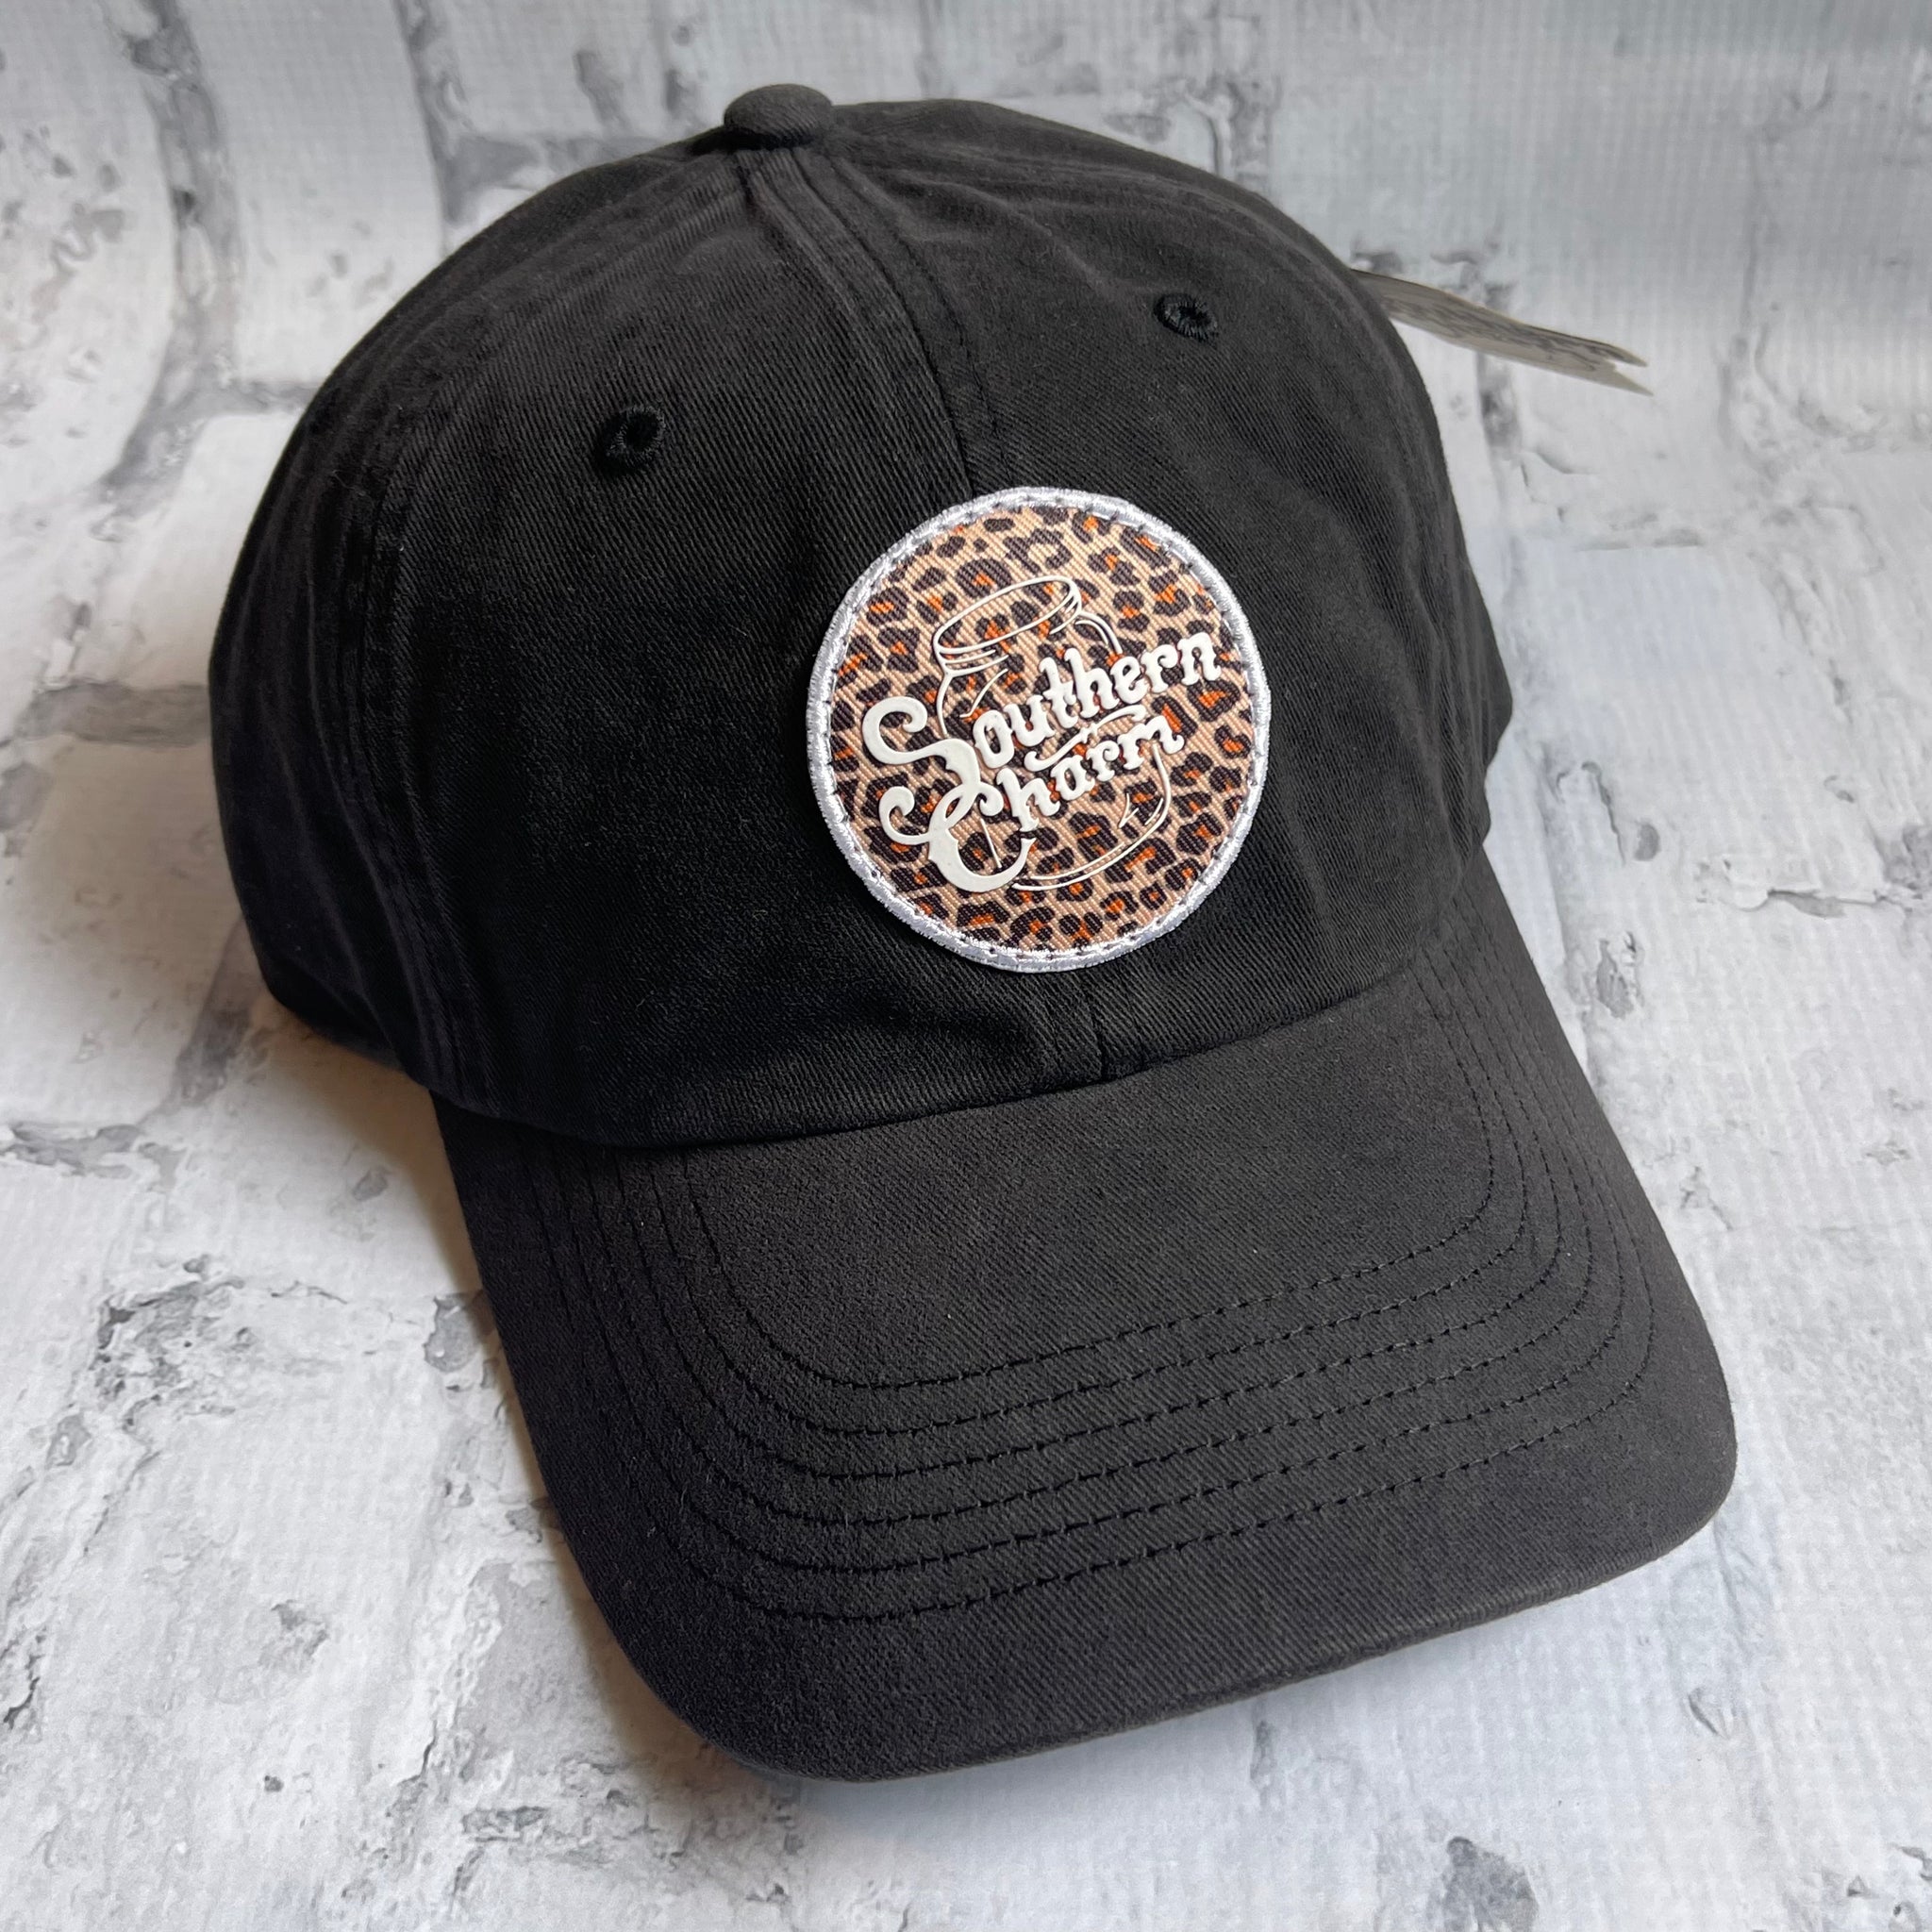 Southern Charm "Cheetah Circle" Hat - Black with Woven Patch - Southern Charm "Shop The Charm"